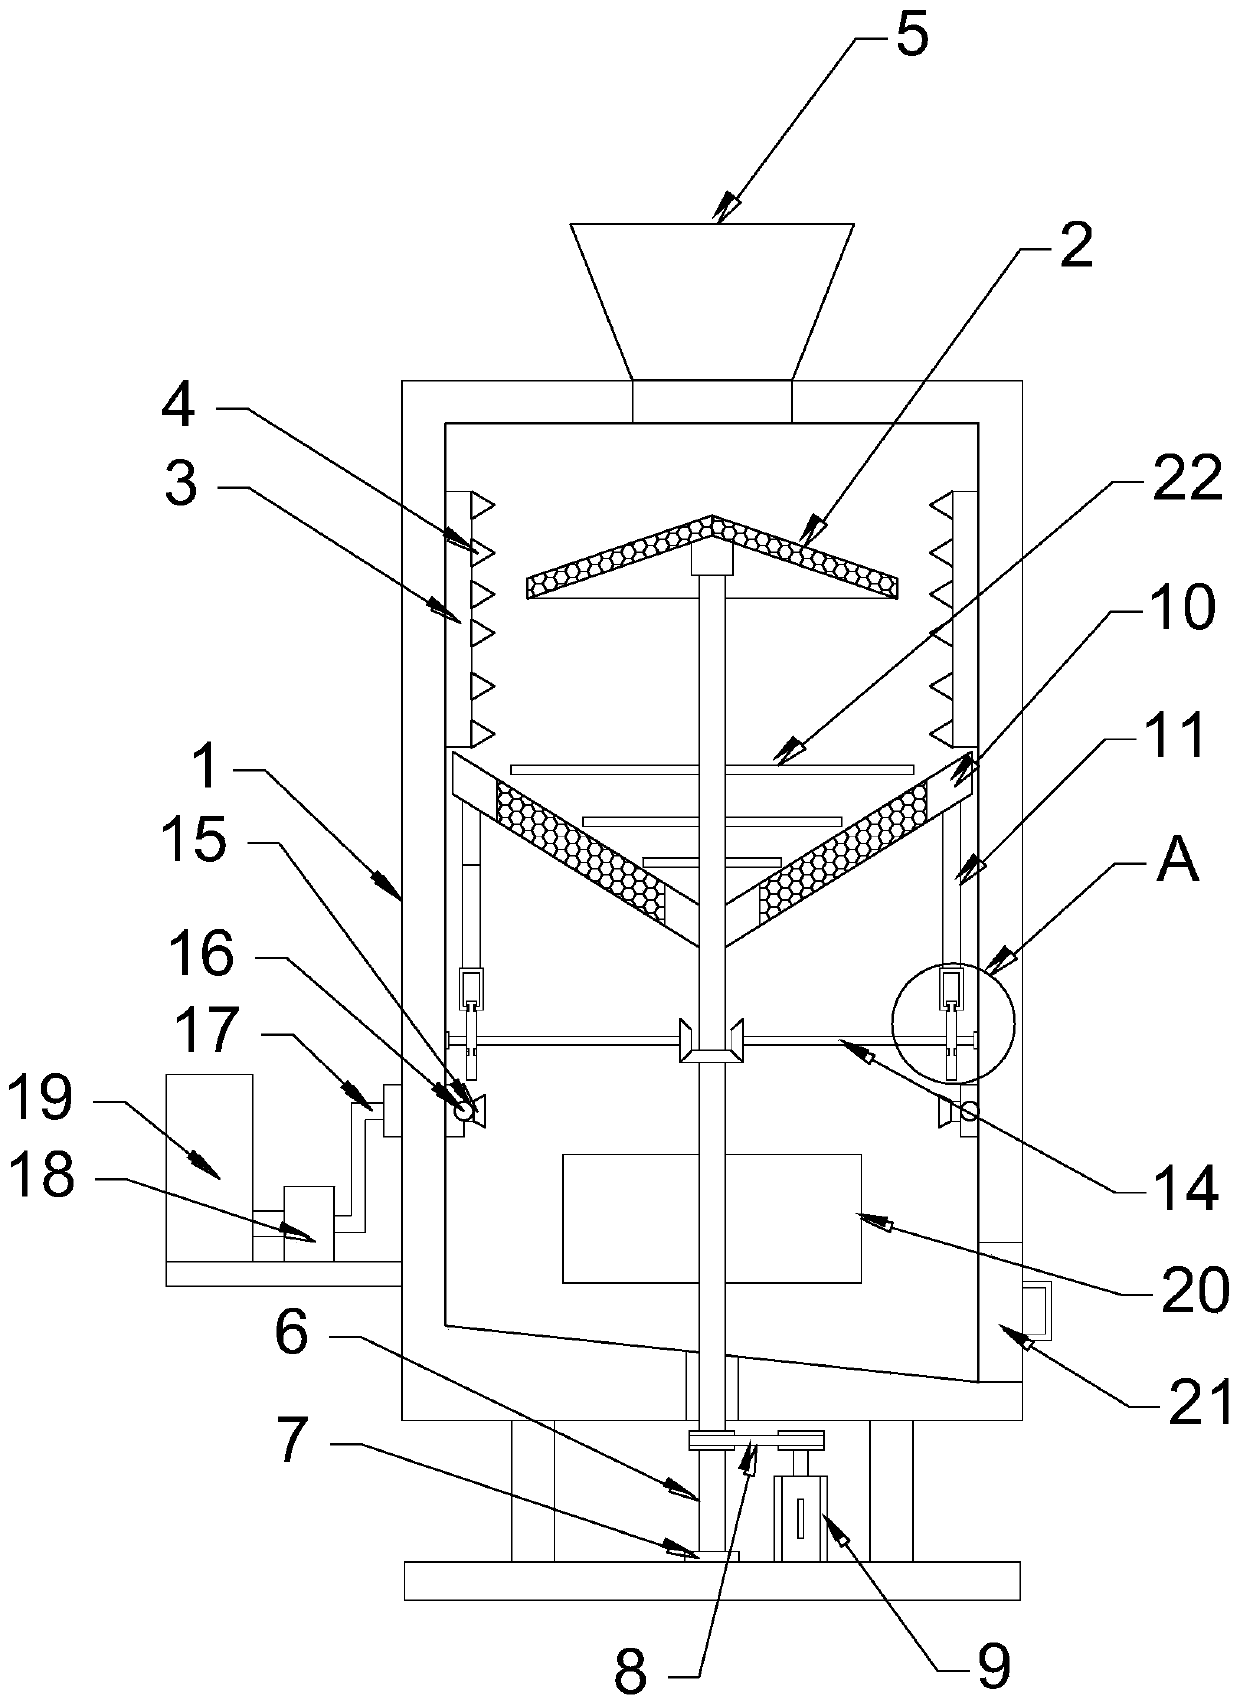 Mixing device for soil remediation